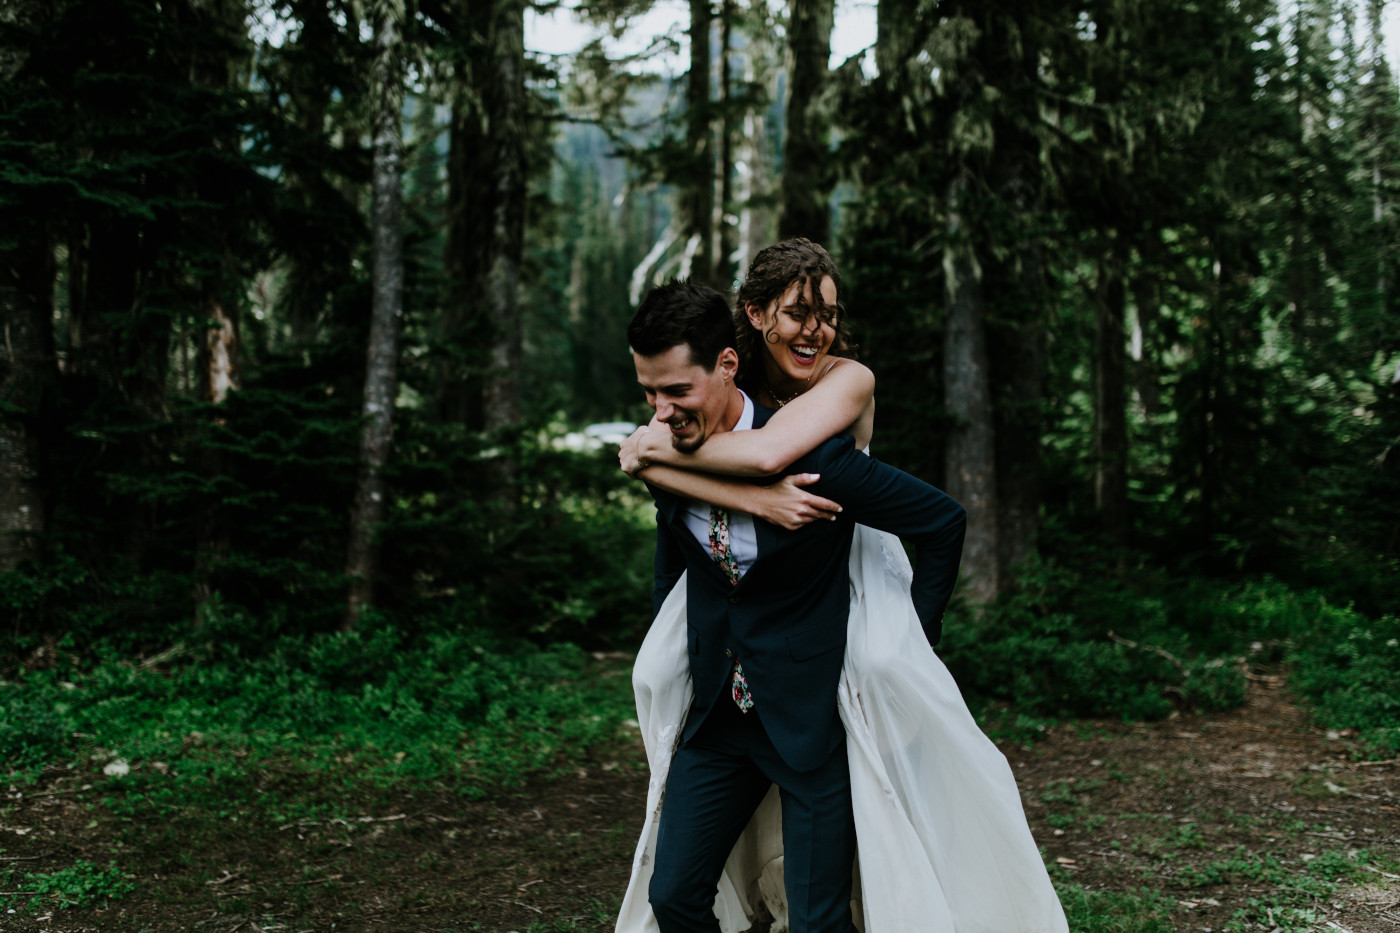 Chad and Tasha play in the woods. Elopement photography at Mount Rainier by Sienna Plus Josh.